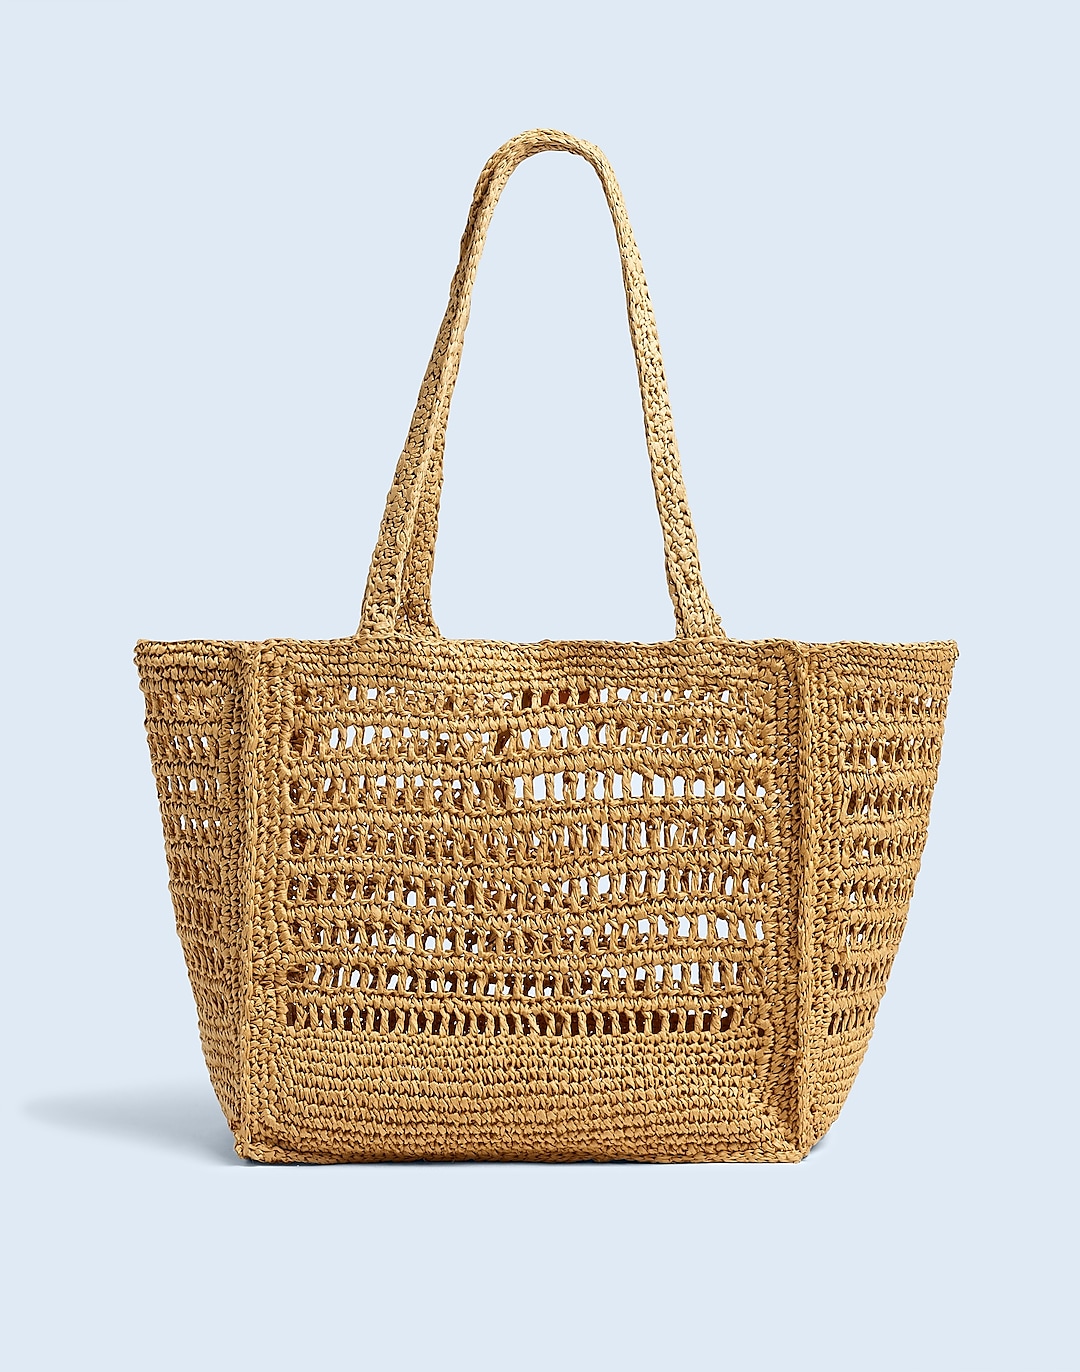 The Open-Crochet Straw Packable Tote | Madewell